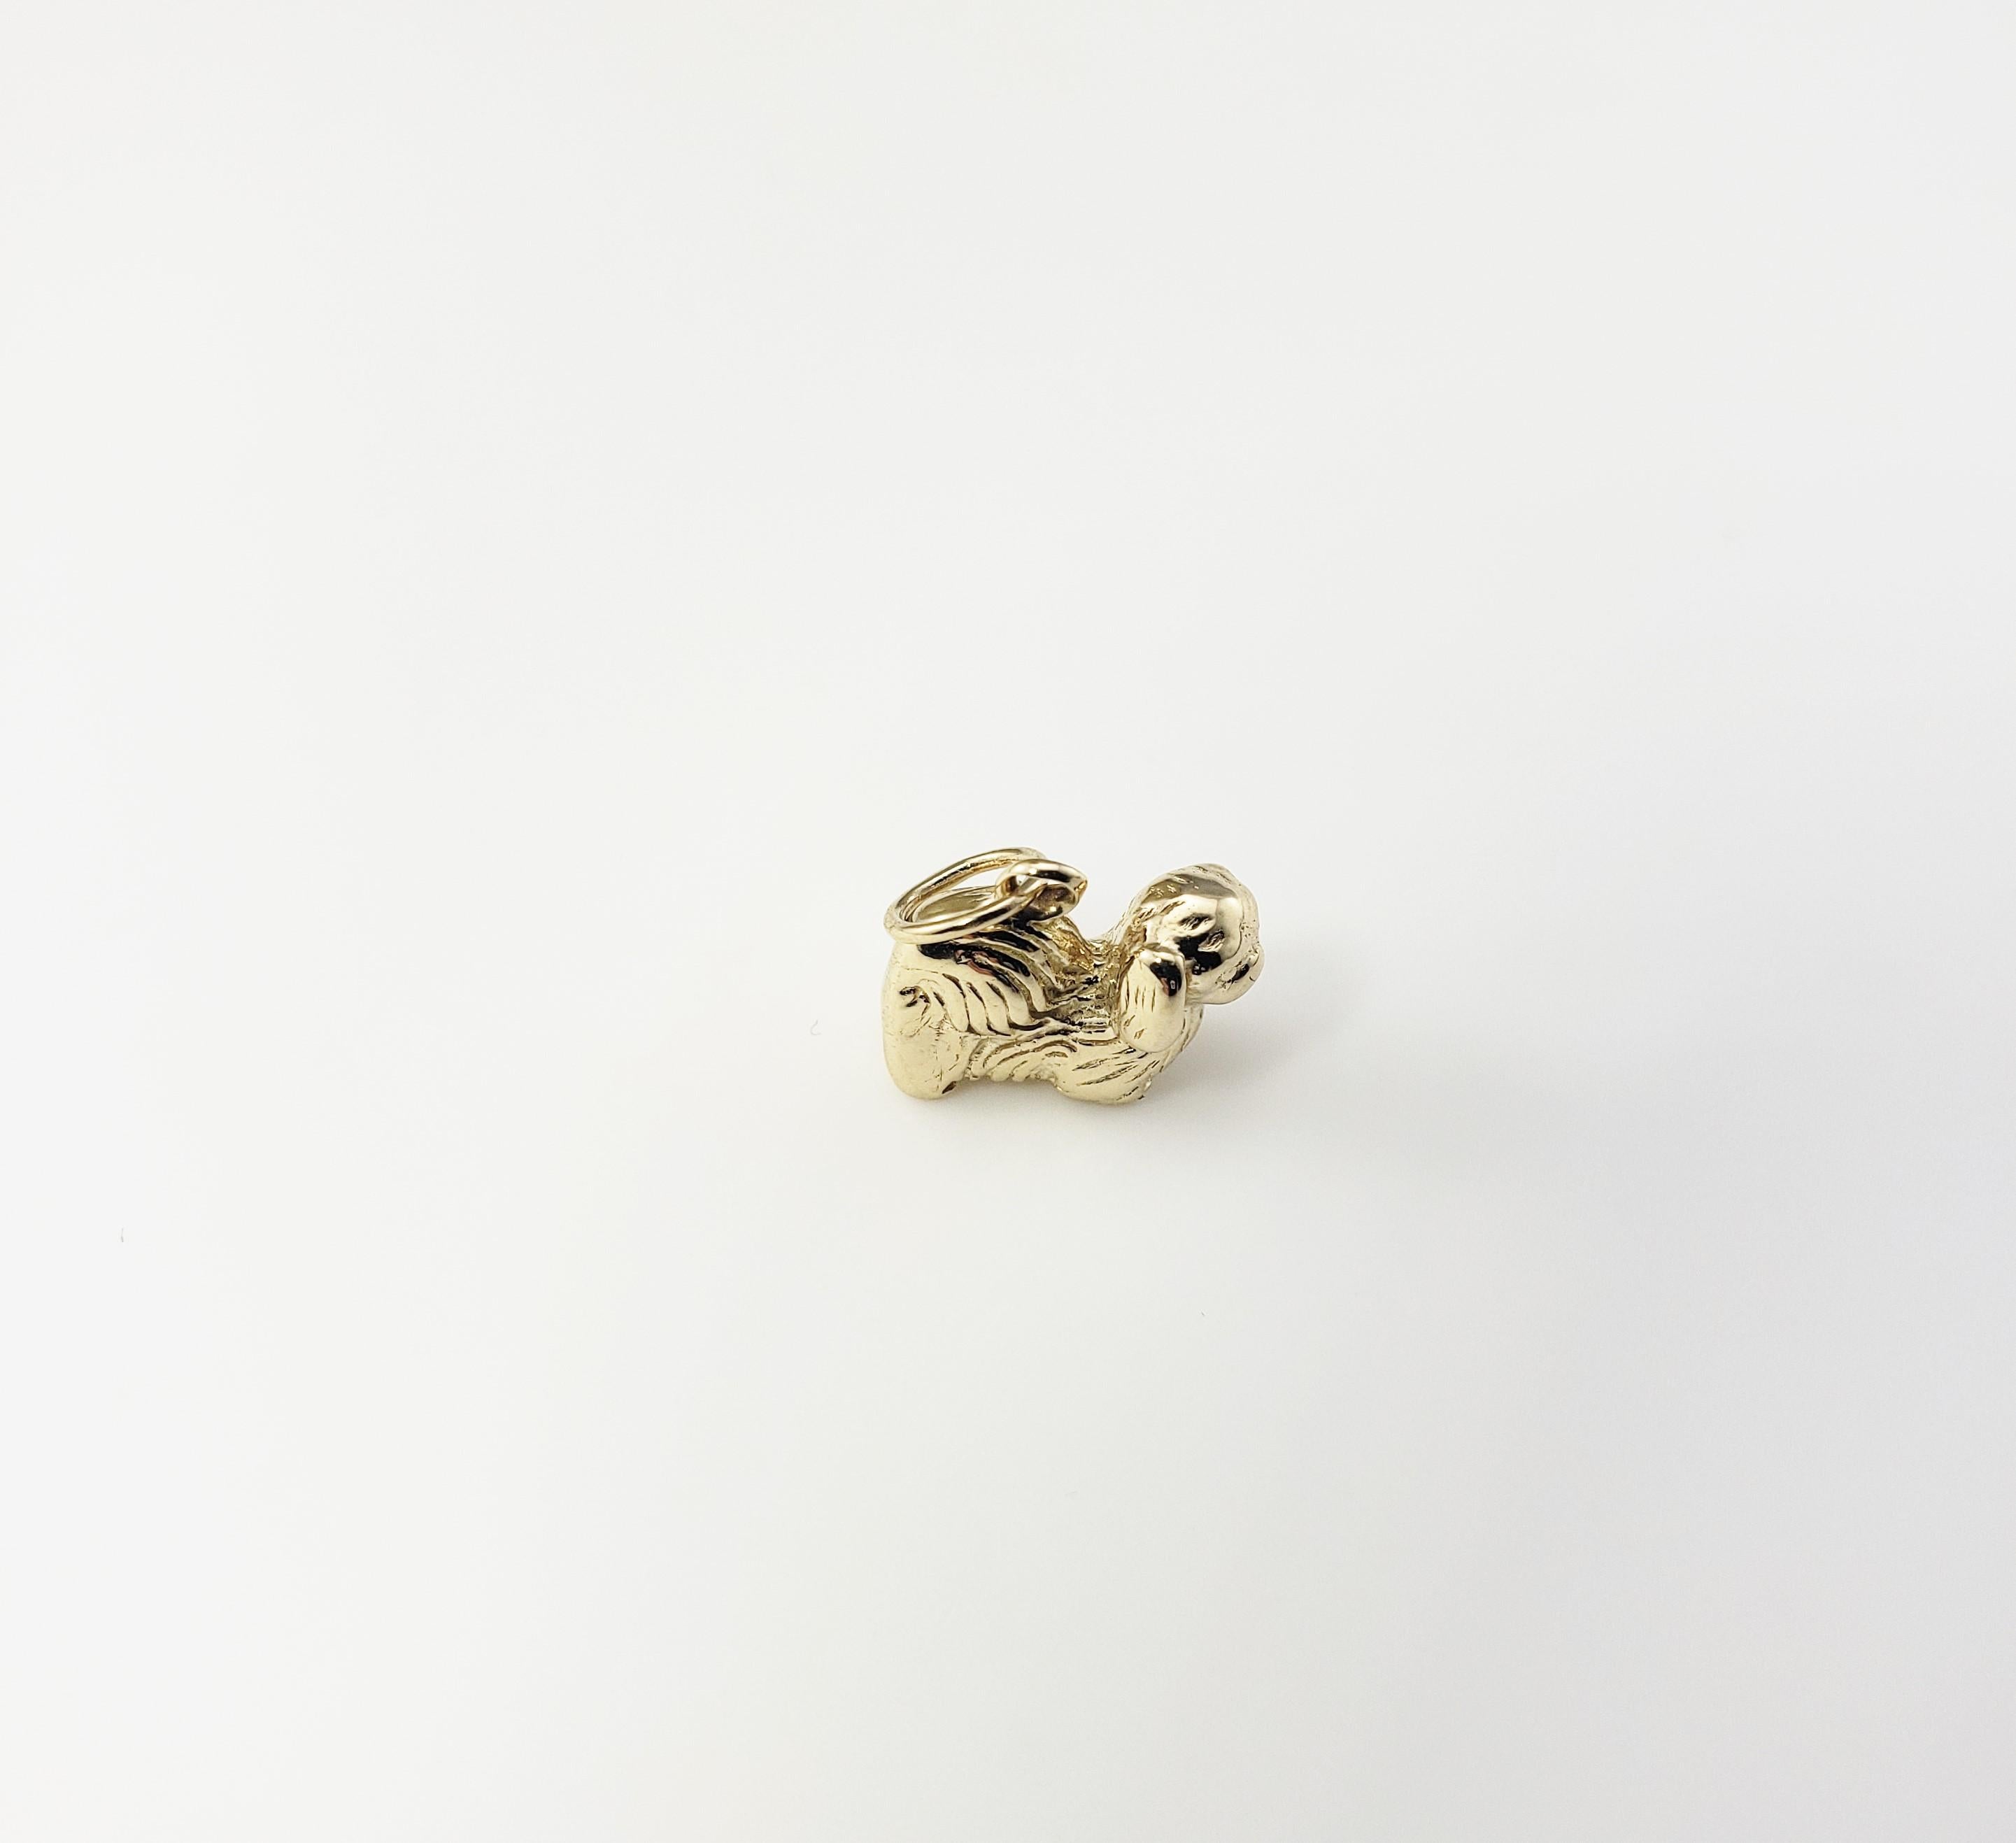 Vintage 10 Karat Yellow Gold Lhasa Apso Charm-

These sweet dogs are known for their loyalty and independence!

This adorable 3D charm features a miniature Lhasa Apso dog meticulously detailed in 10K yellow gold.

Size: 8 mm x 10 mm (actual charm)